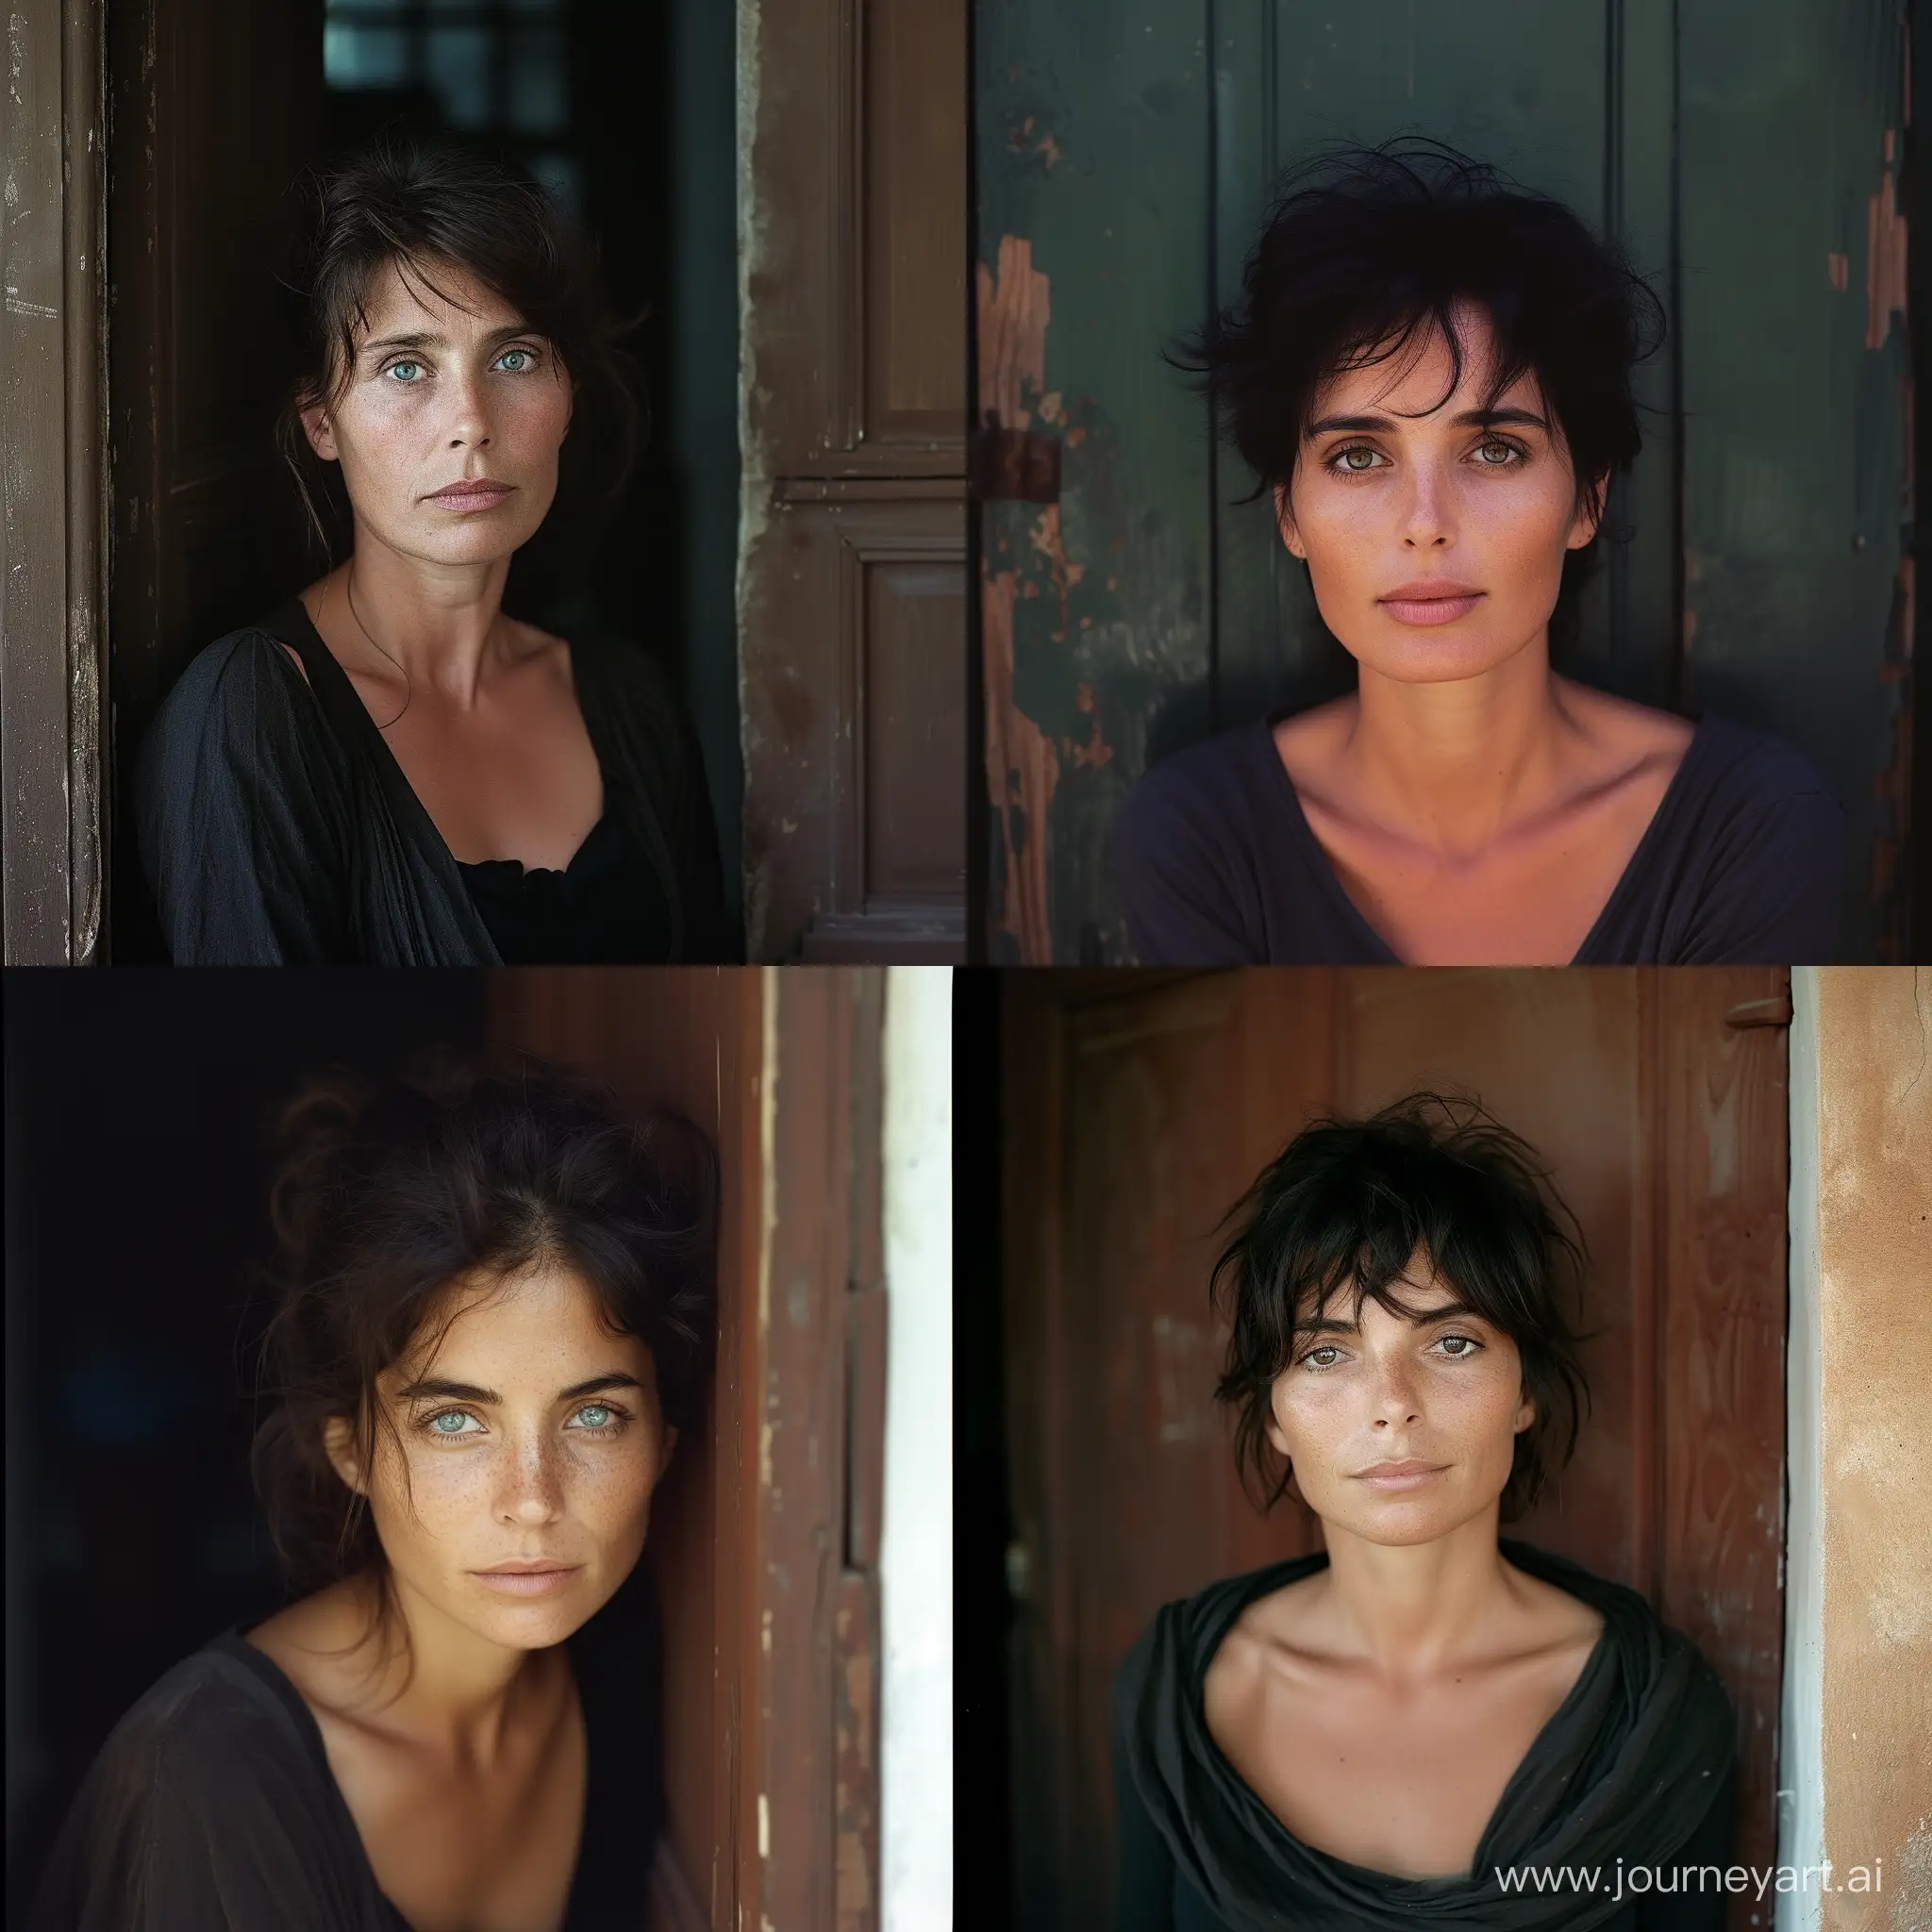 Photographic portrait of a 40 years old Italian woman, in front of a brownish door, peaceful and relaxed expression, piercing eyes eye contact, summer gentle light. Shot with Kodak Portra 160::2 ; in the style of Peter Lindbergh::2

